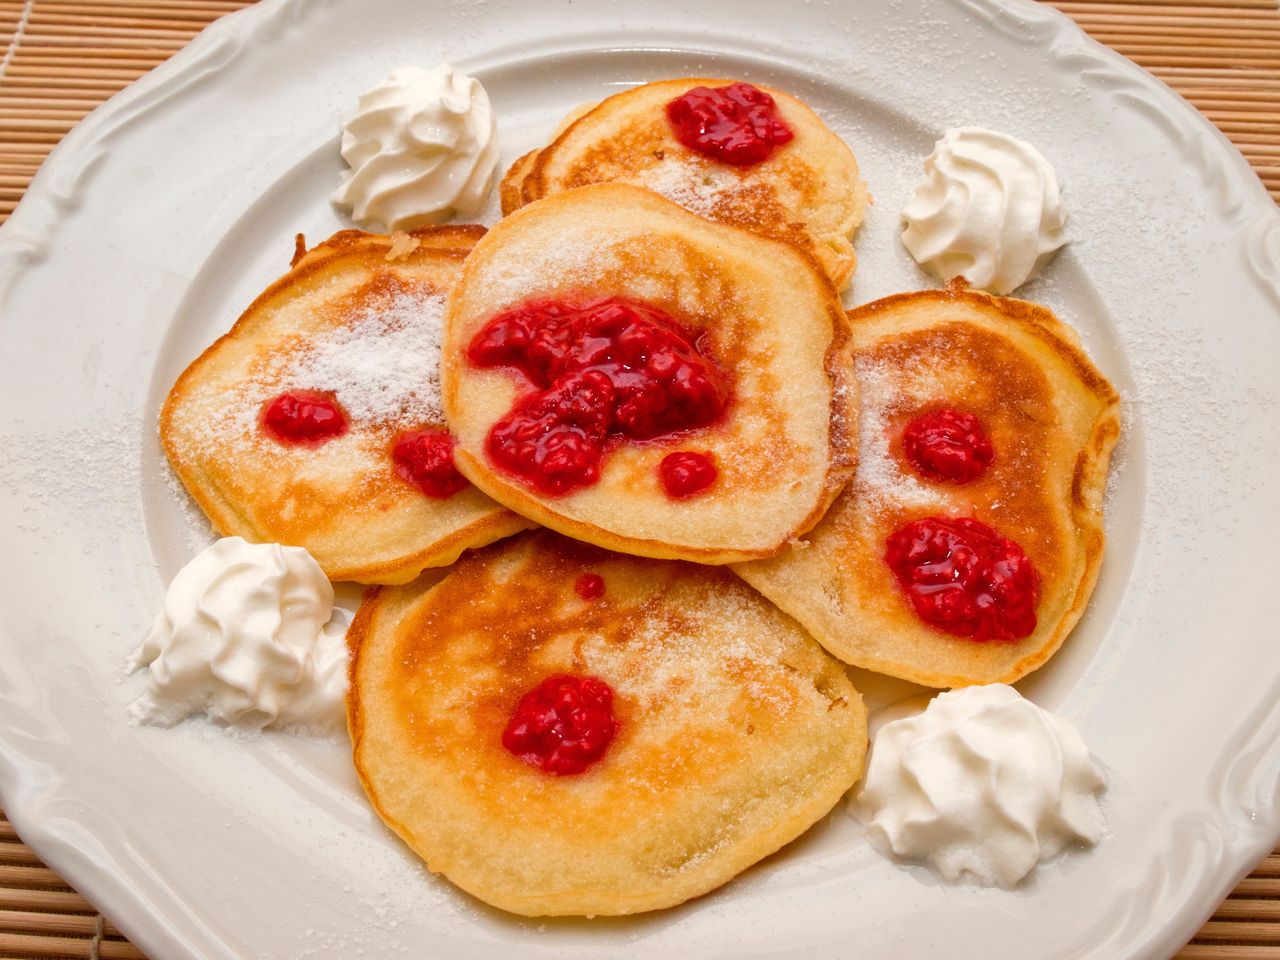 Pancakes with seasonal fruit: making breakfast café-style at home